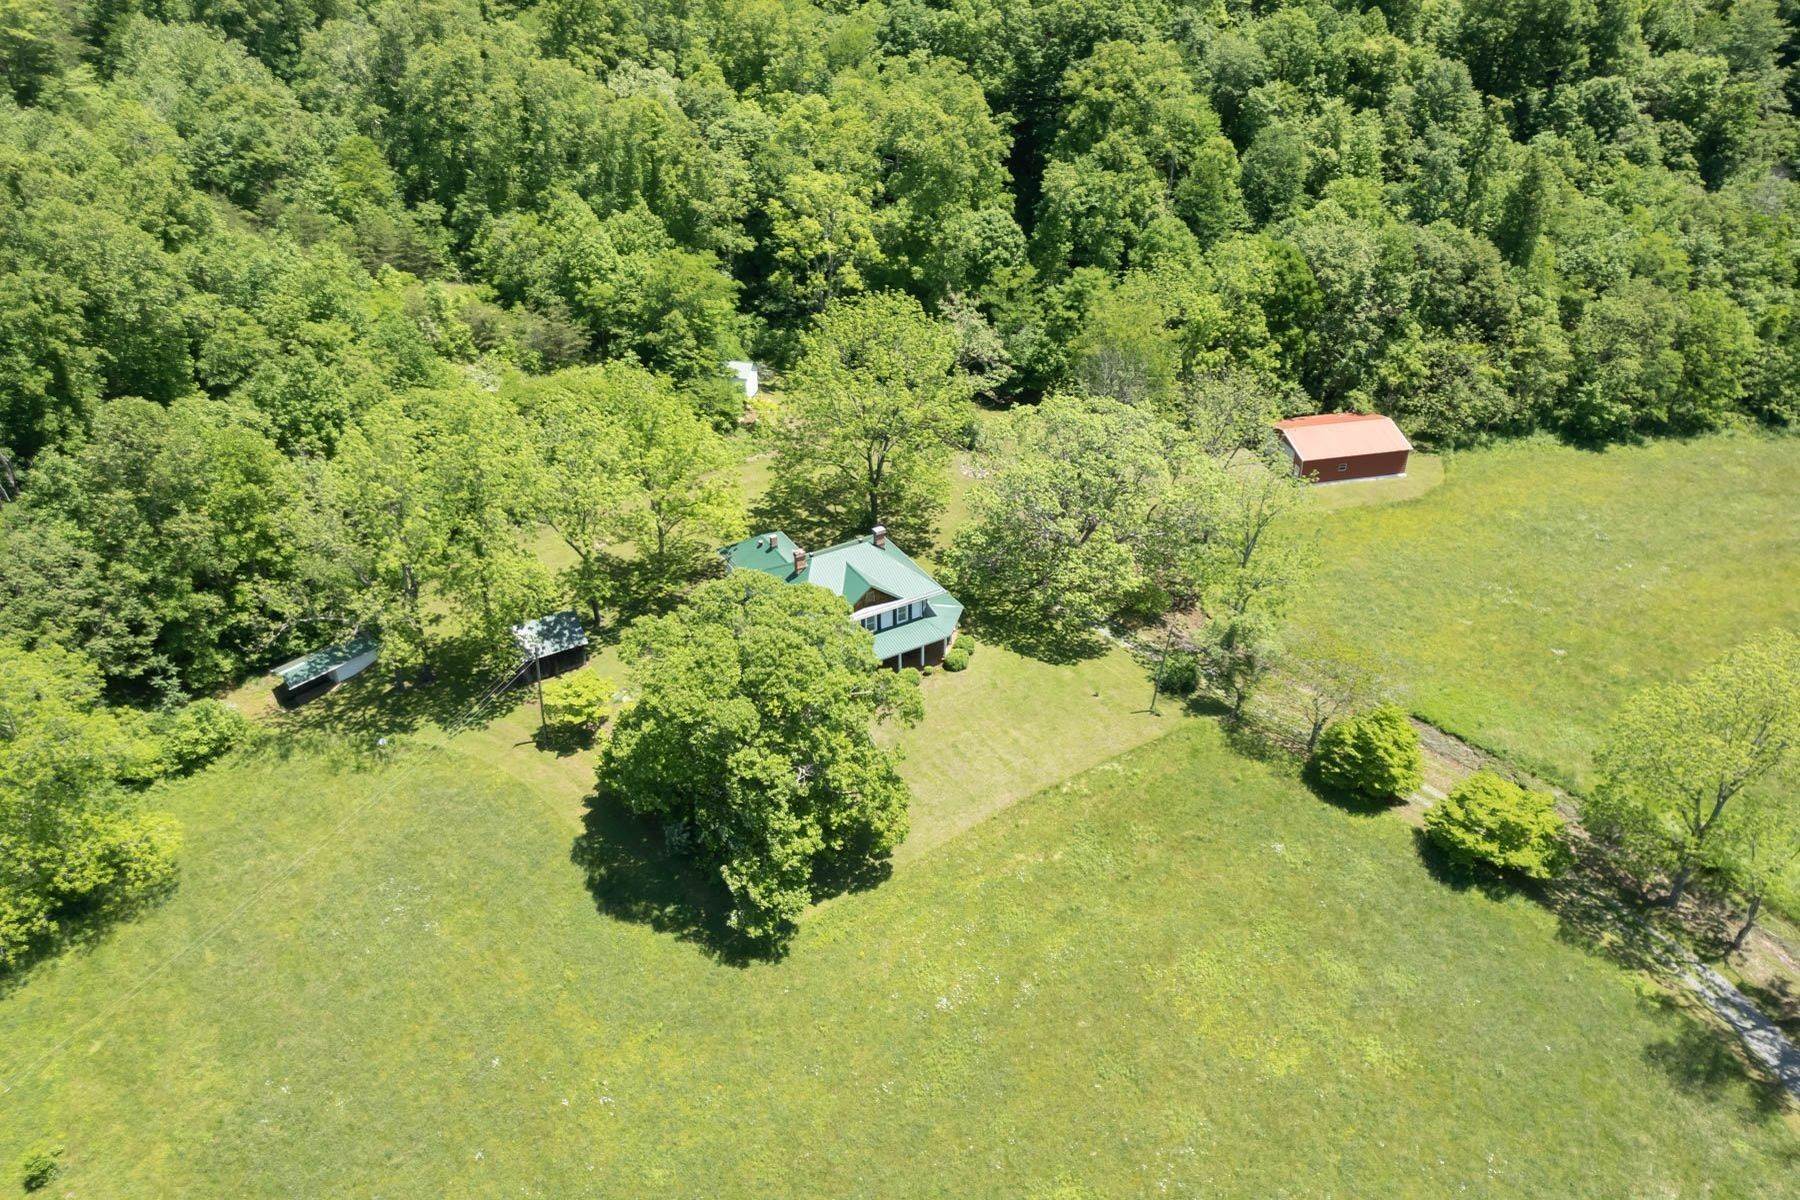 44. Farm and Ranch Properties for Sale at 2436 Kibler Valley Road Ararat, Virginia 24053 United States